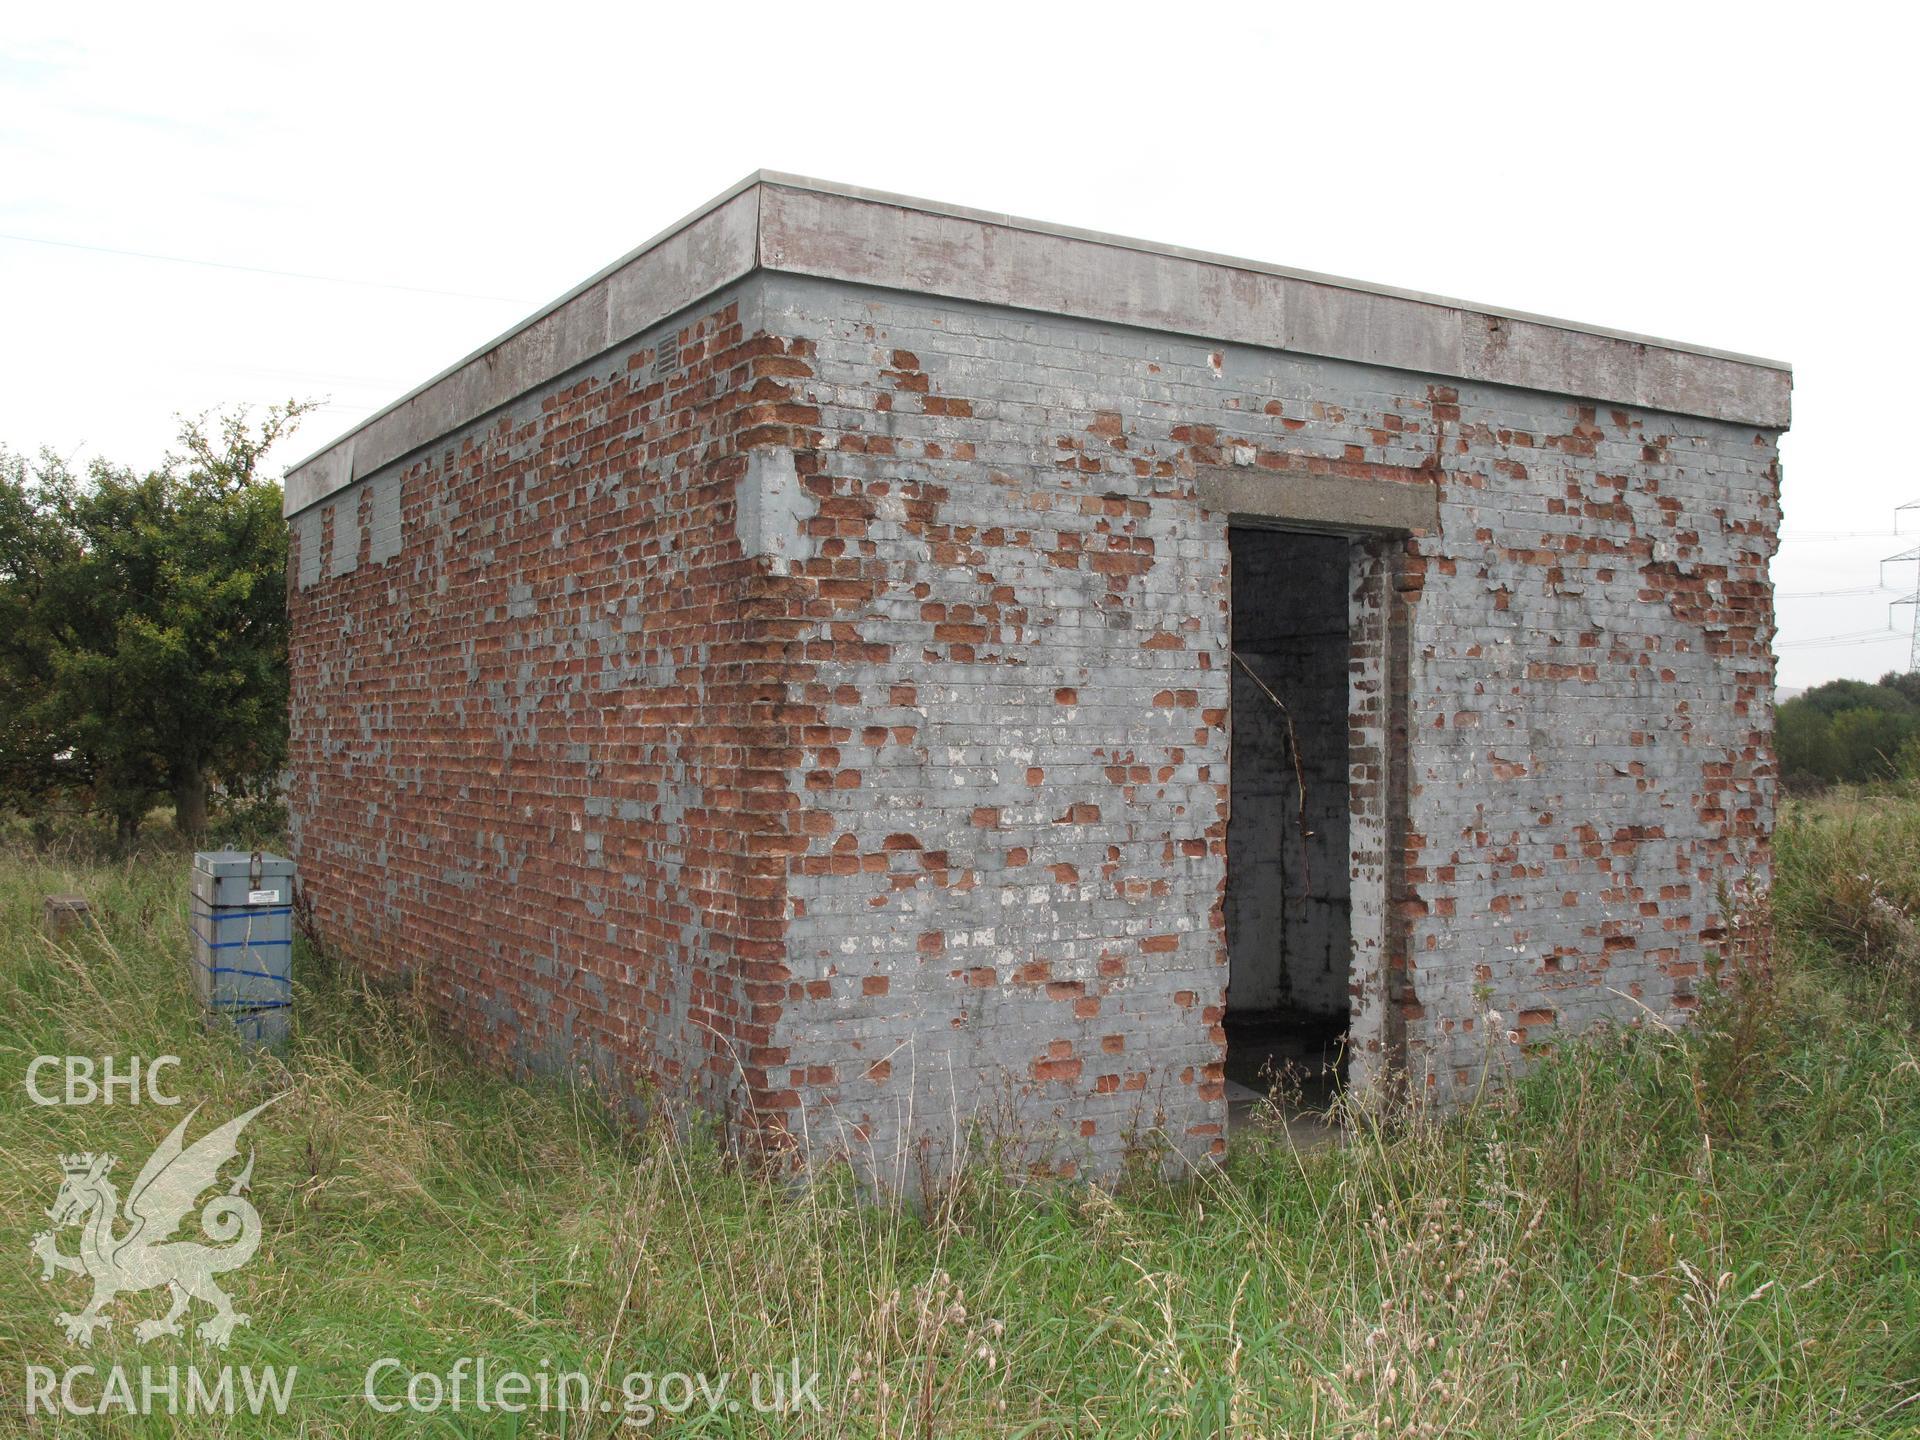 Electricity Sub Station 16th Avenue Hirwaun ROF, from the southwest, taken by Brian Malaws on 08 October 2010.